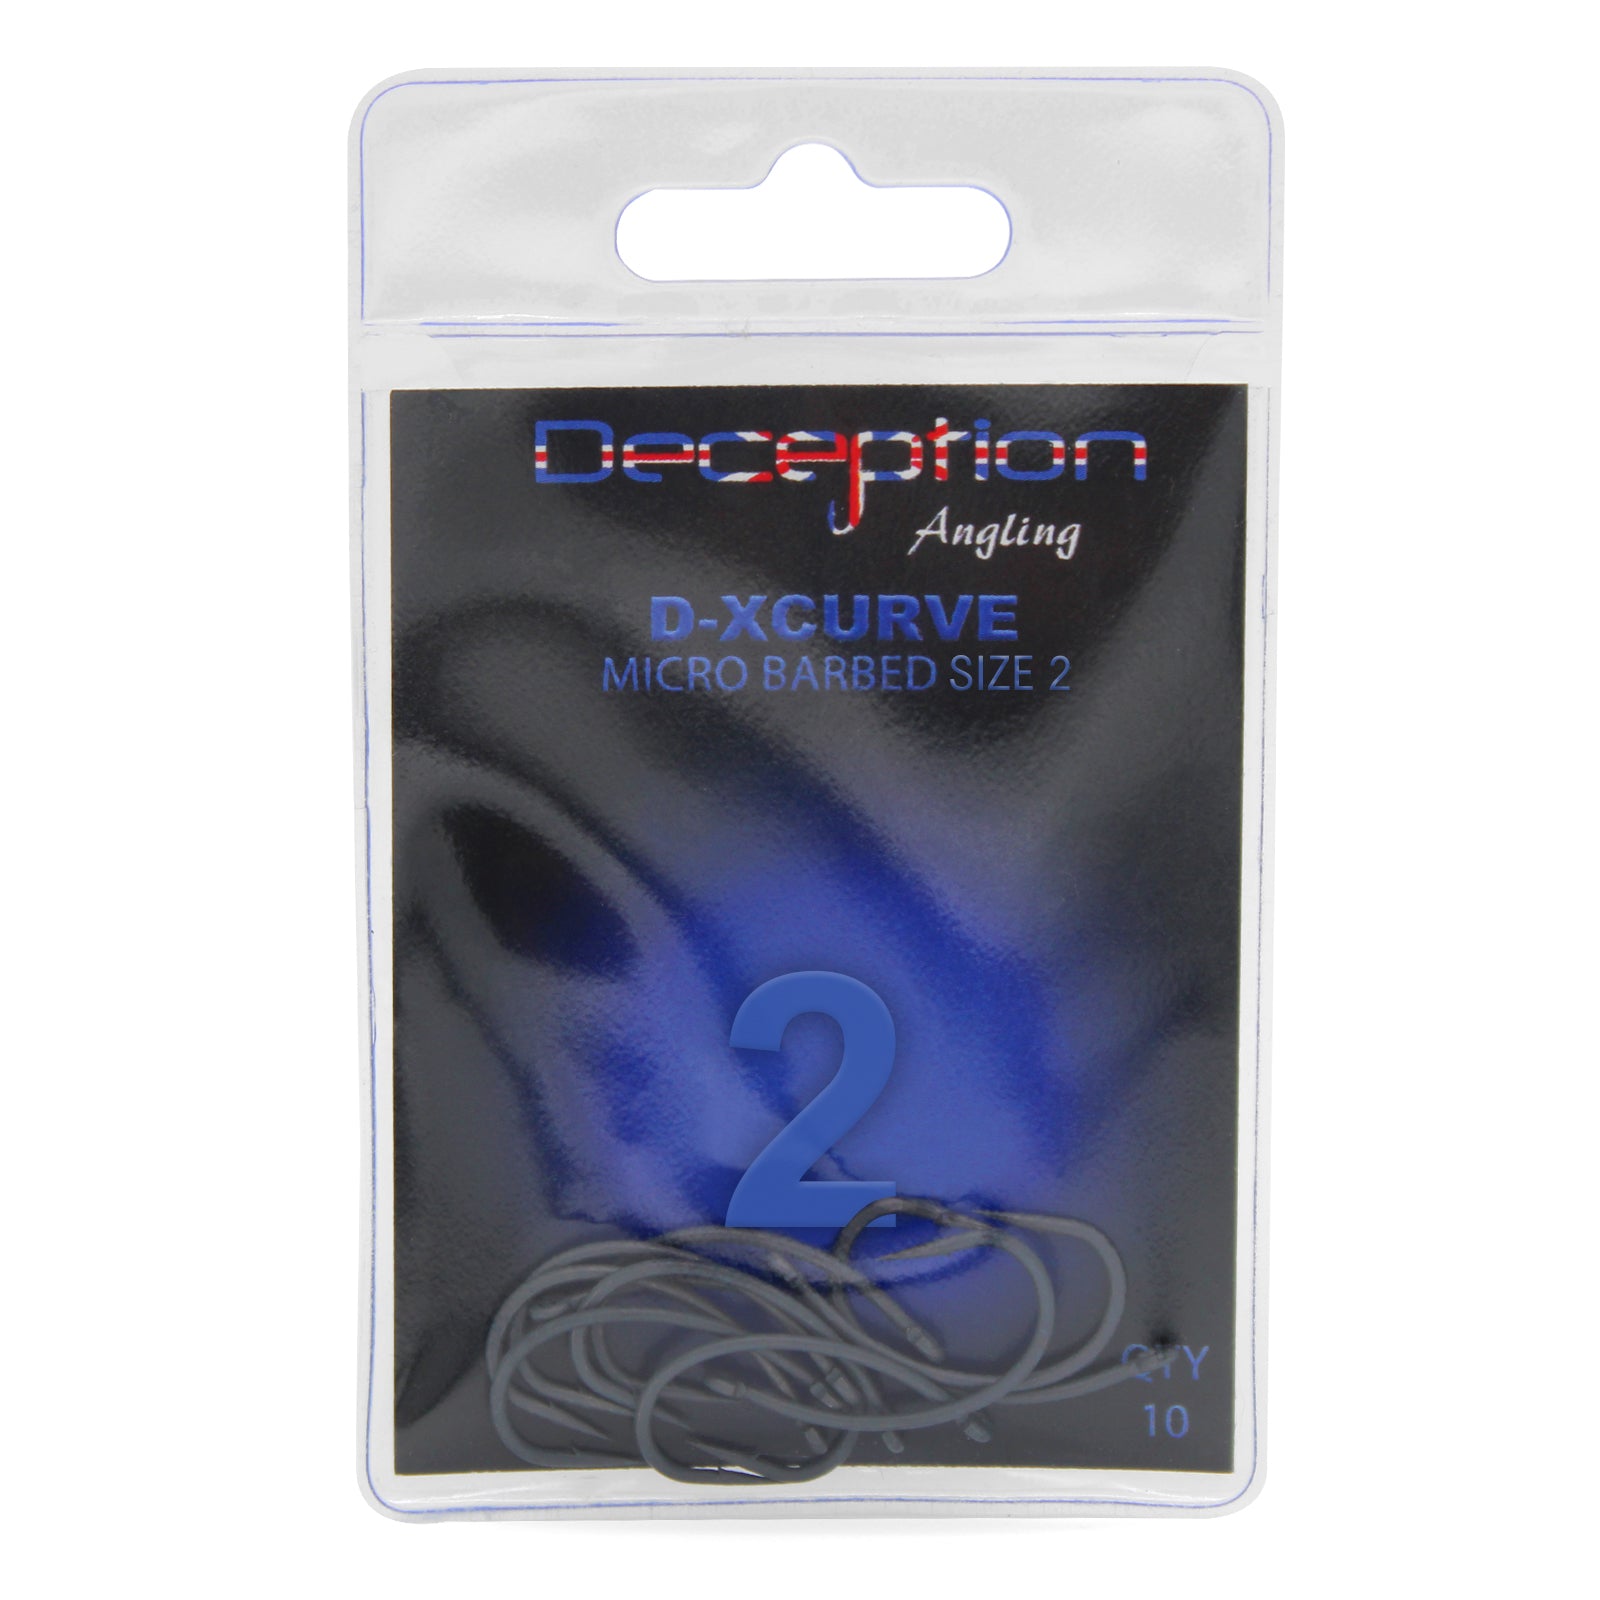 Deception Angling D-XCurve Micro Barbed Fishing Hooks Pack of 10 Size 2